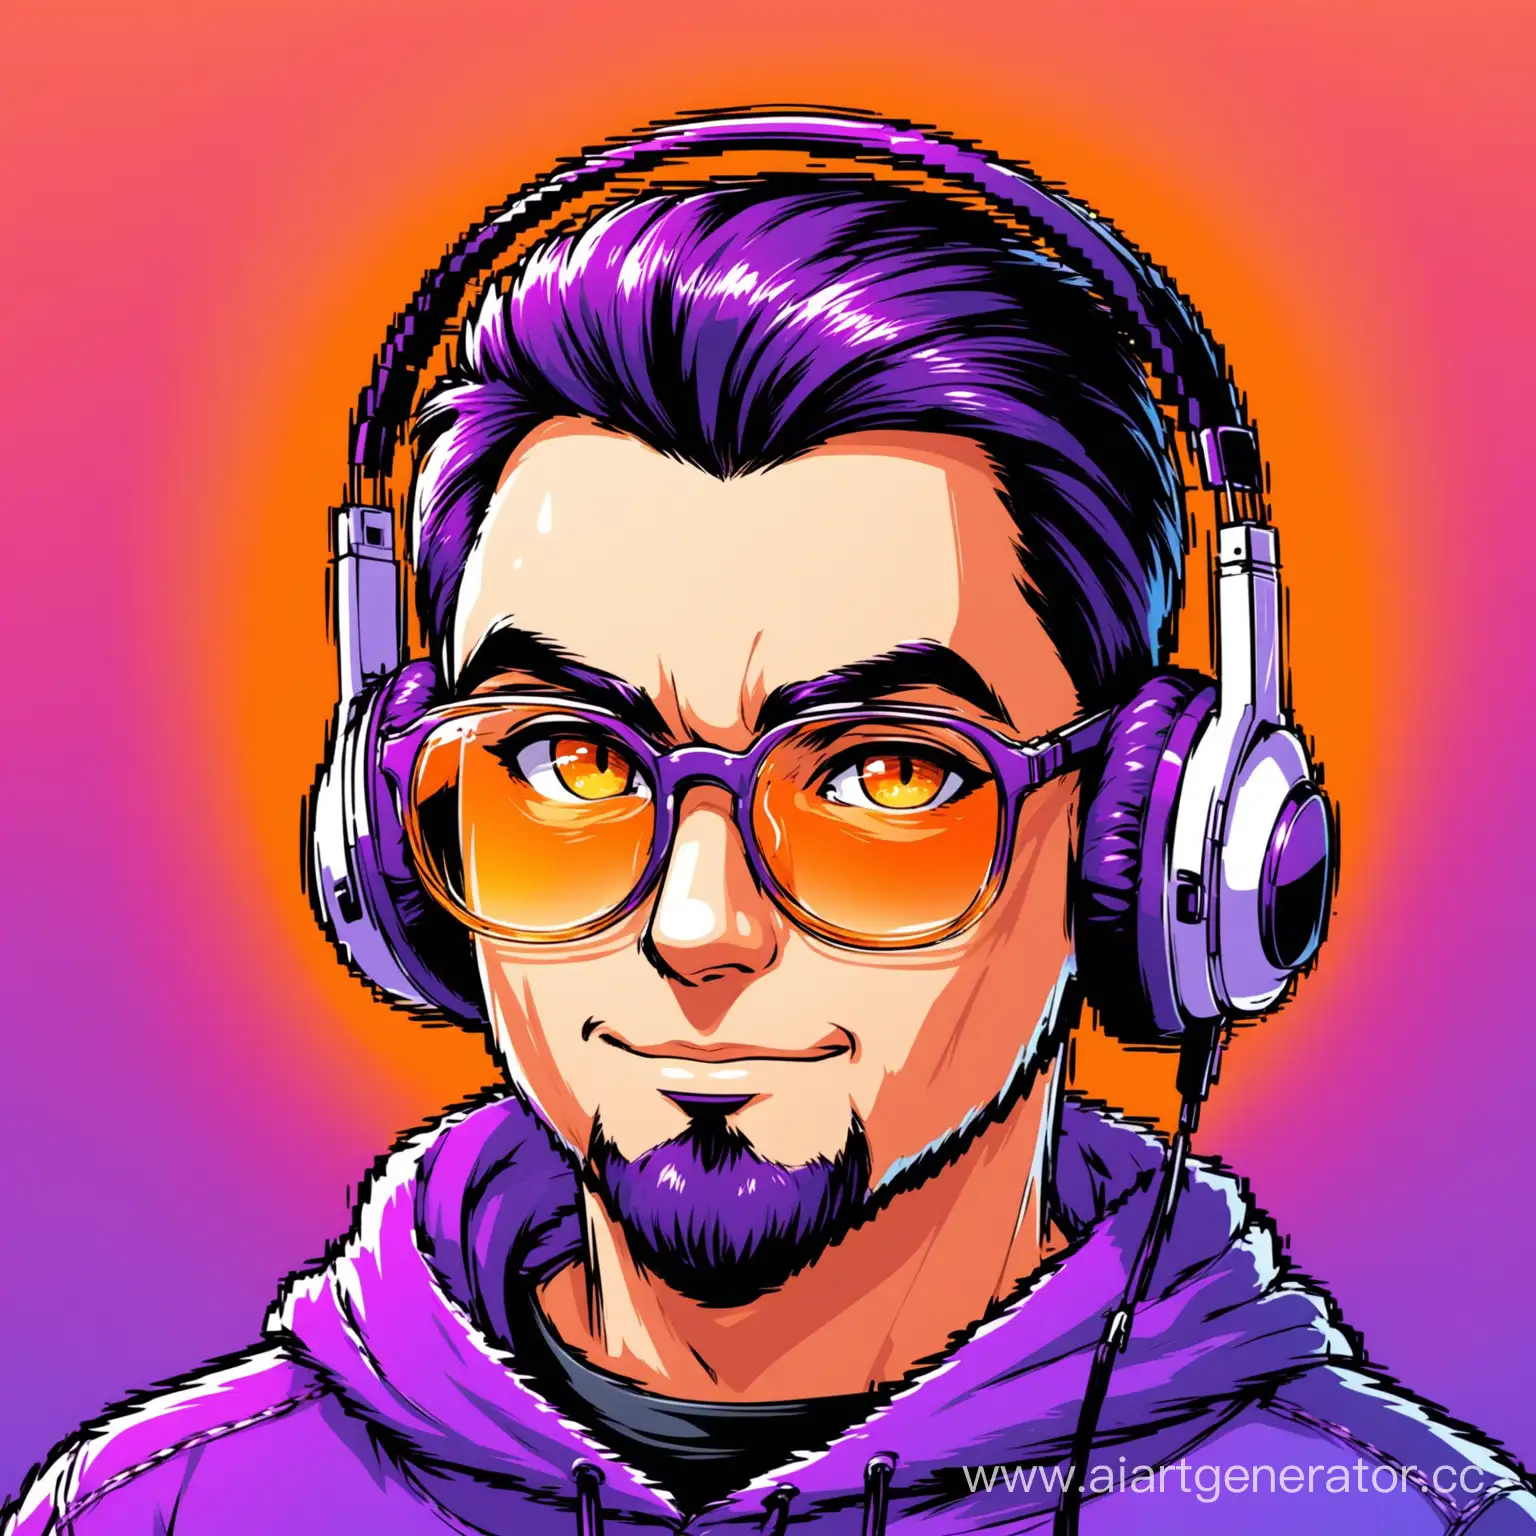 gENERATE PLEASE MAN PICTURE IN THE CARTOON STYLE IN THE HEADPHONES AND IN THE GLASSES IN THE PURPLE-ORANGE GRADIENT